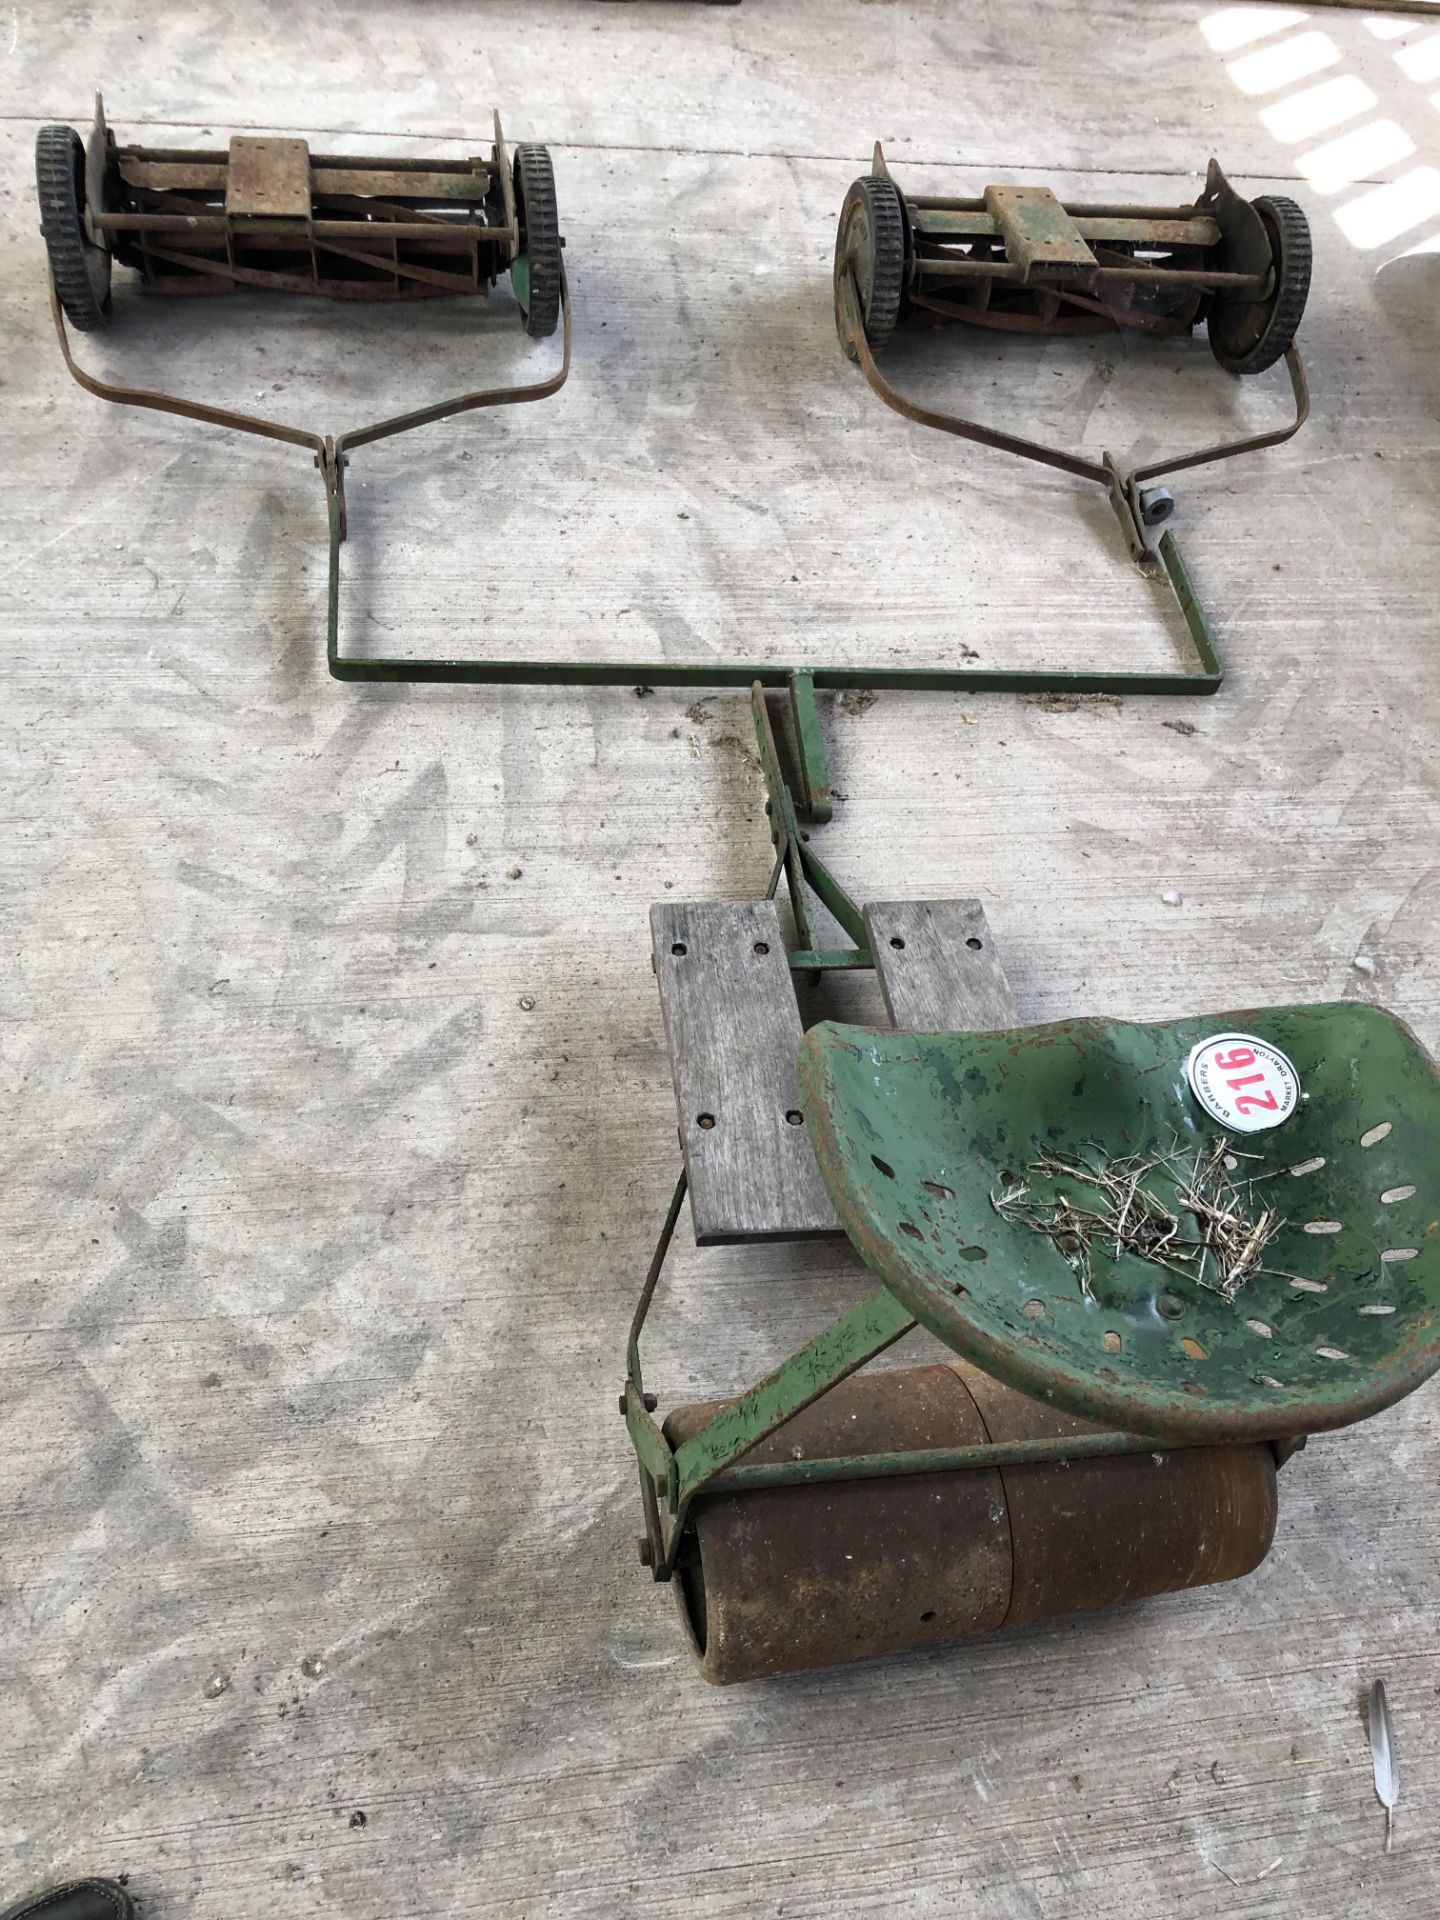 Roller seat and two mower attachments